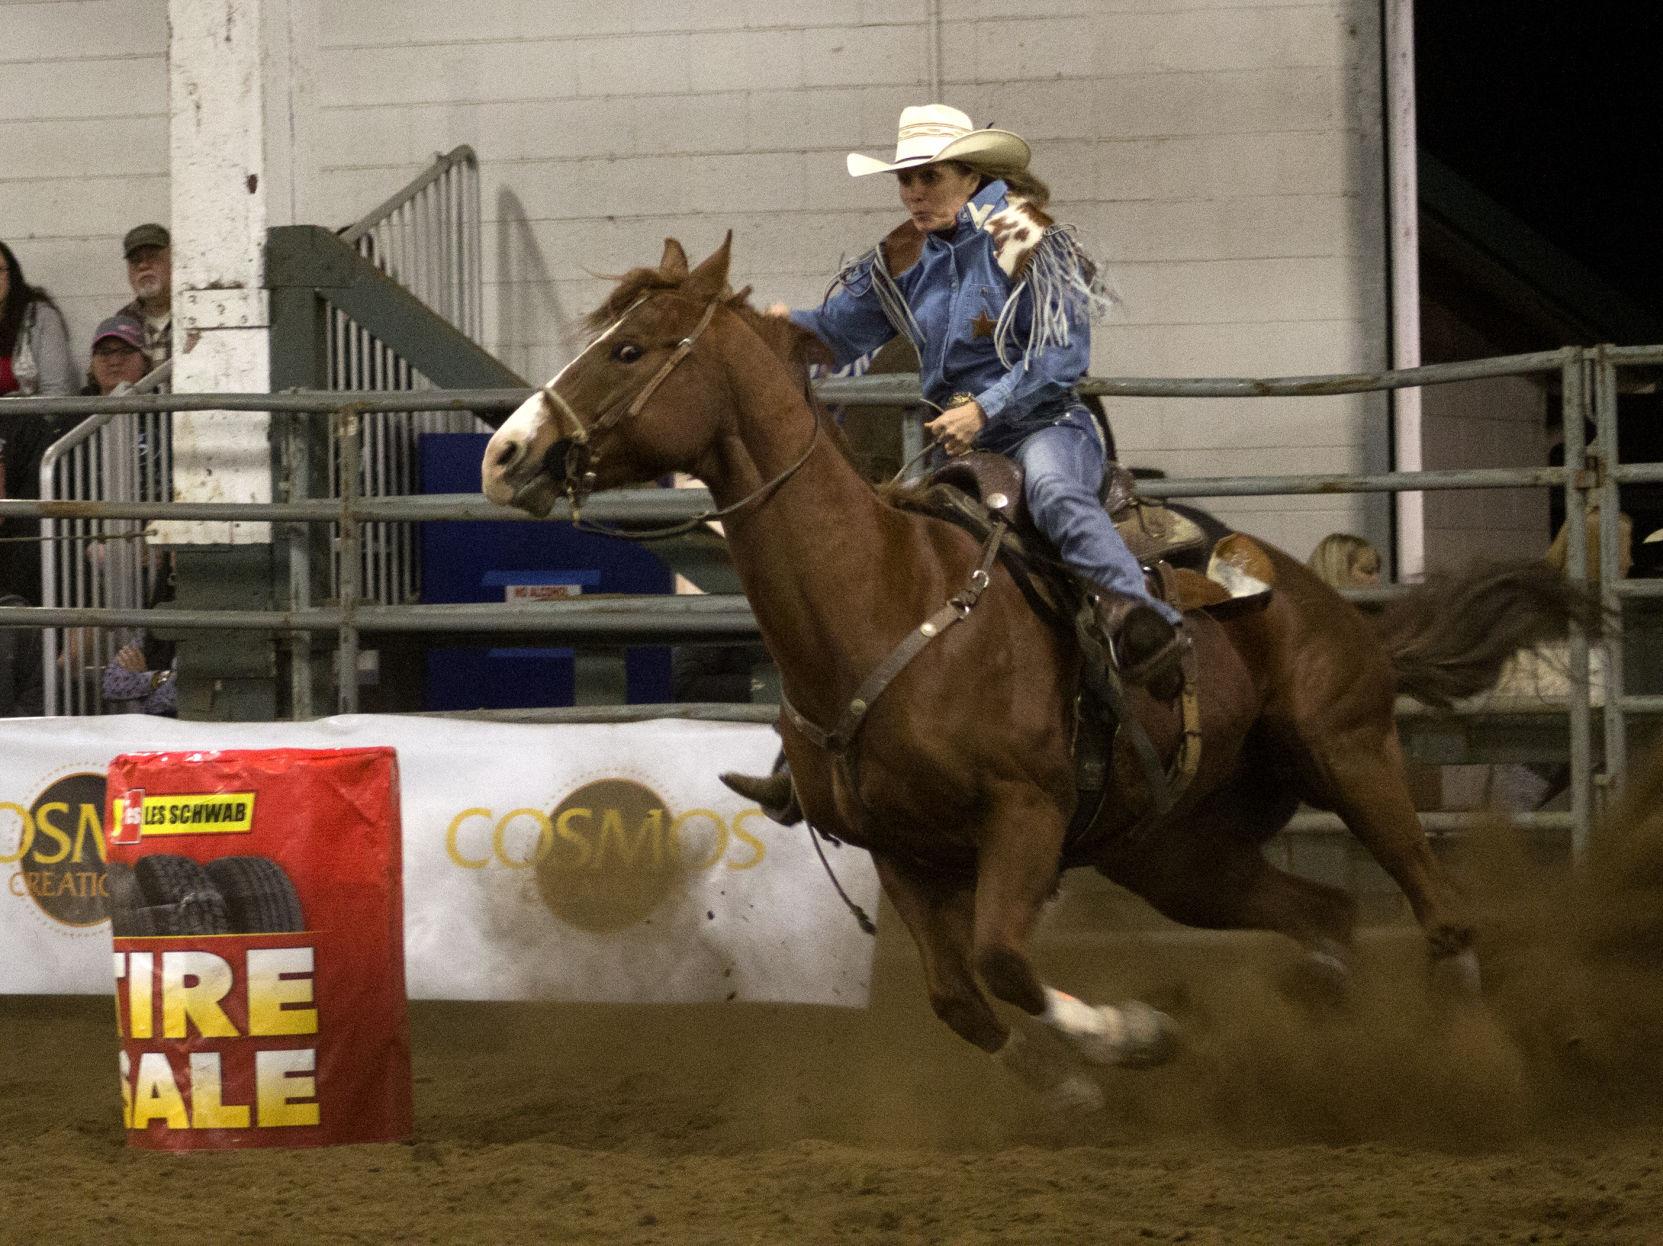 Springfield riders perform well at rodeo Sports